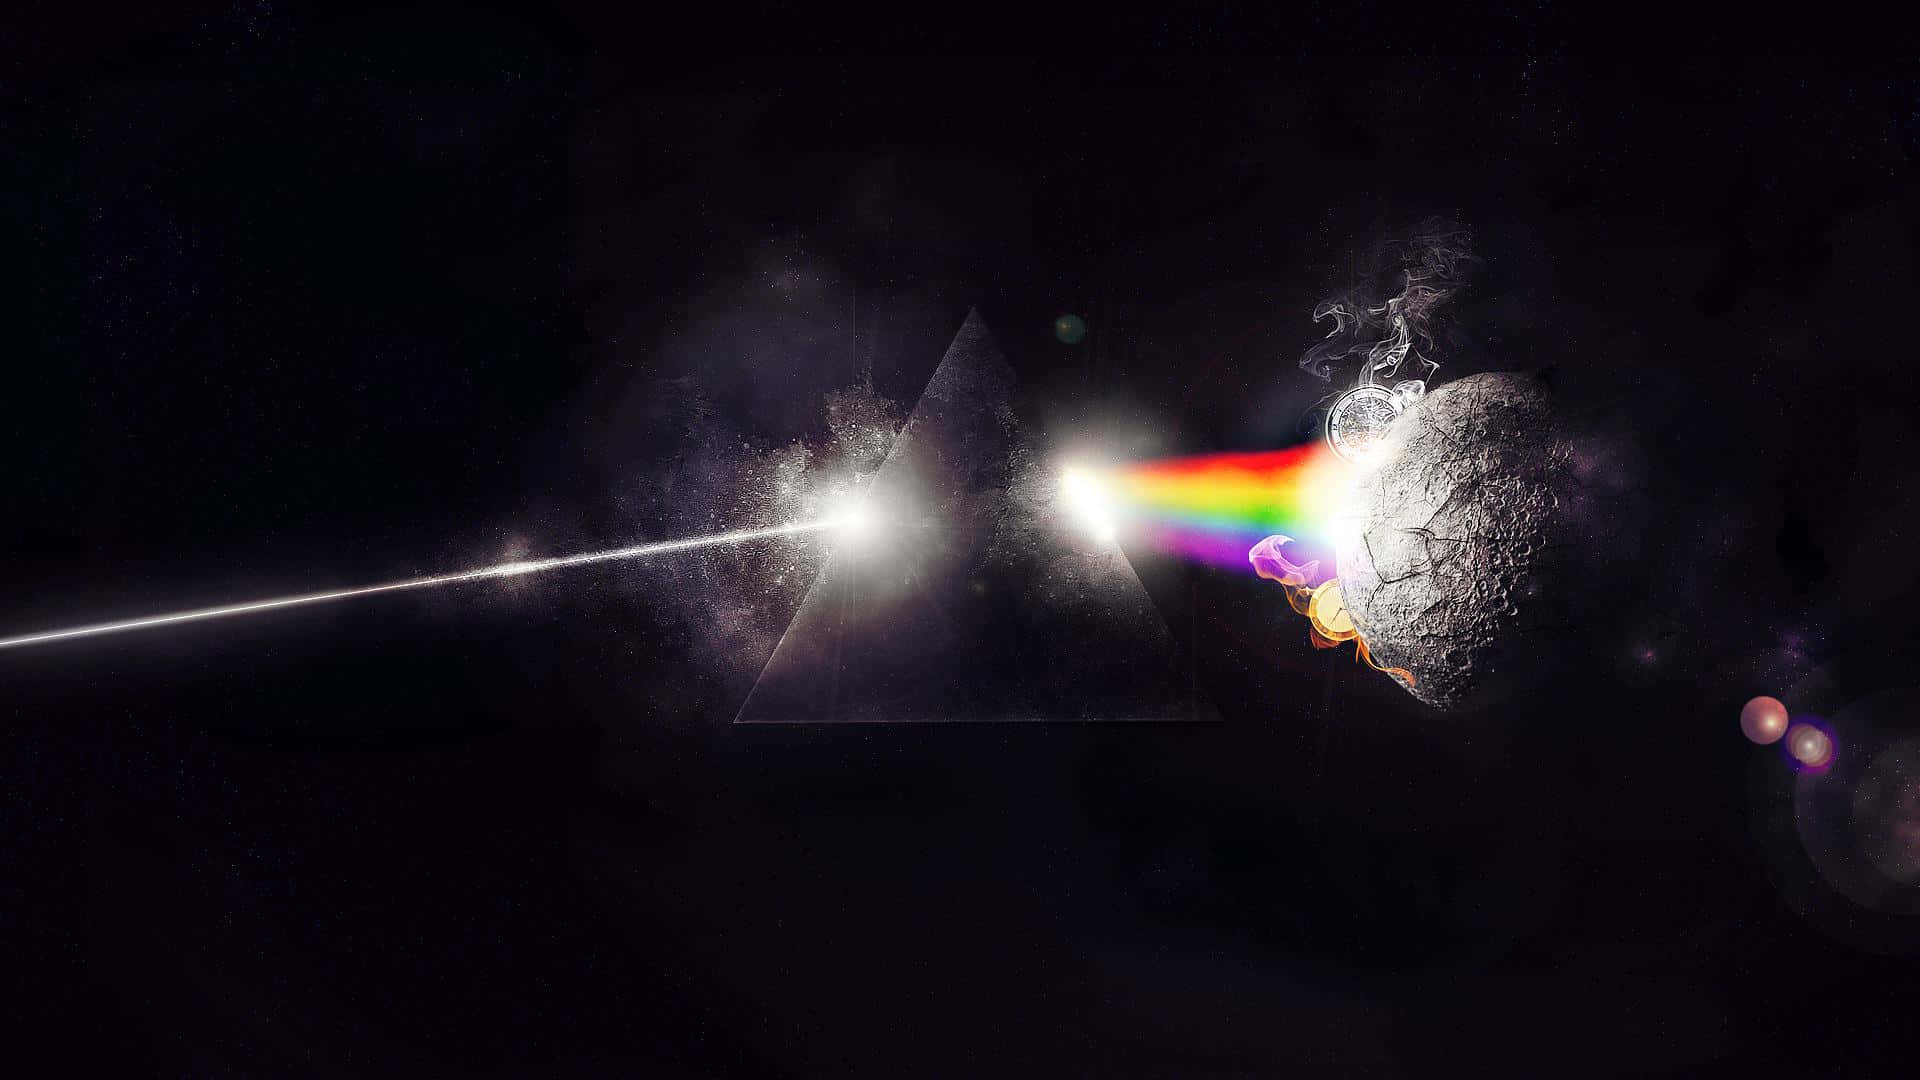 An '80s Classic - Pink Floyd's "Dark Side Of The Moon" Wallpaper